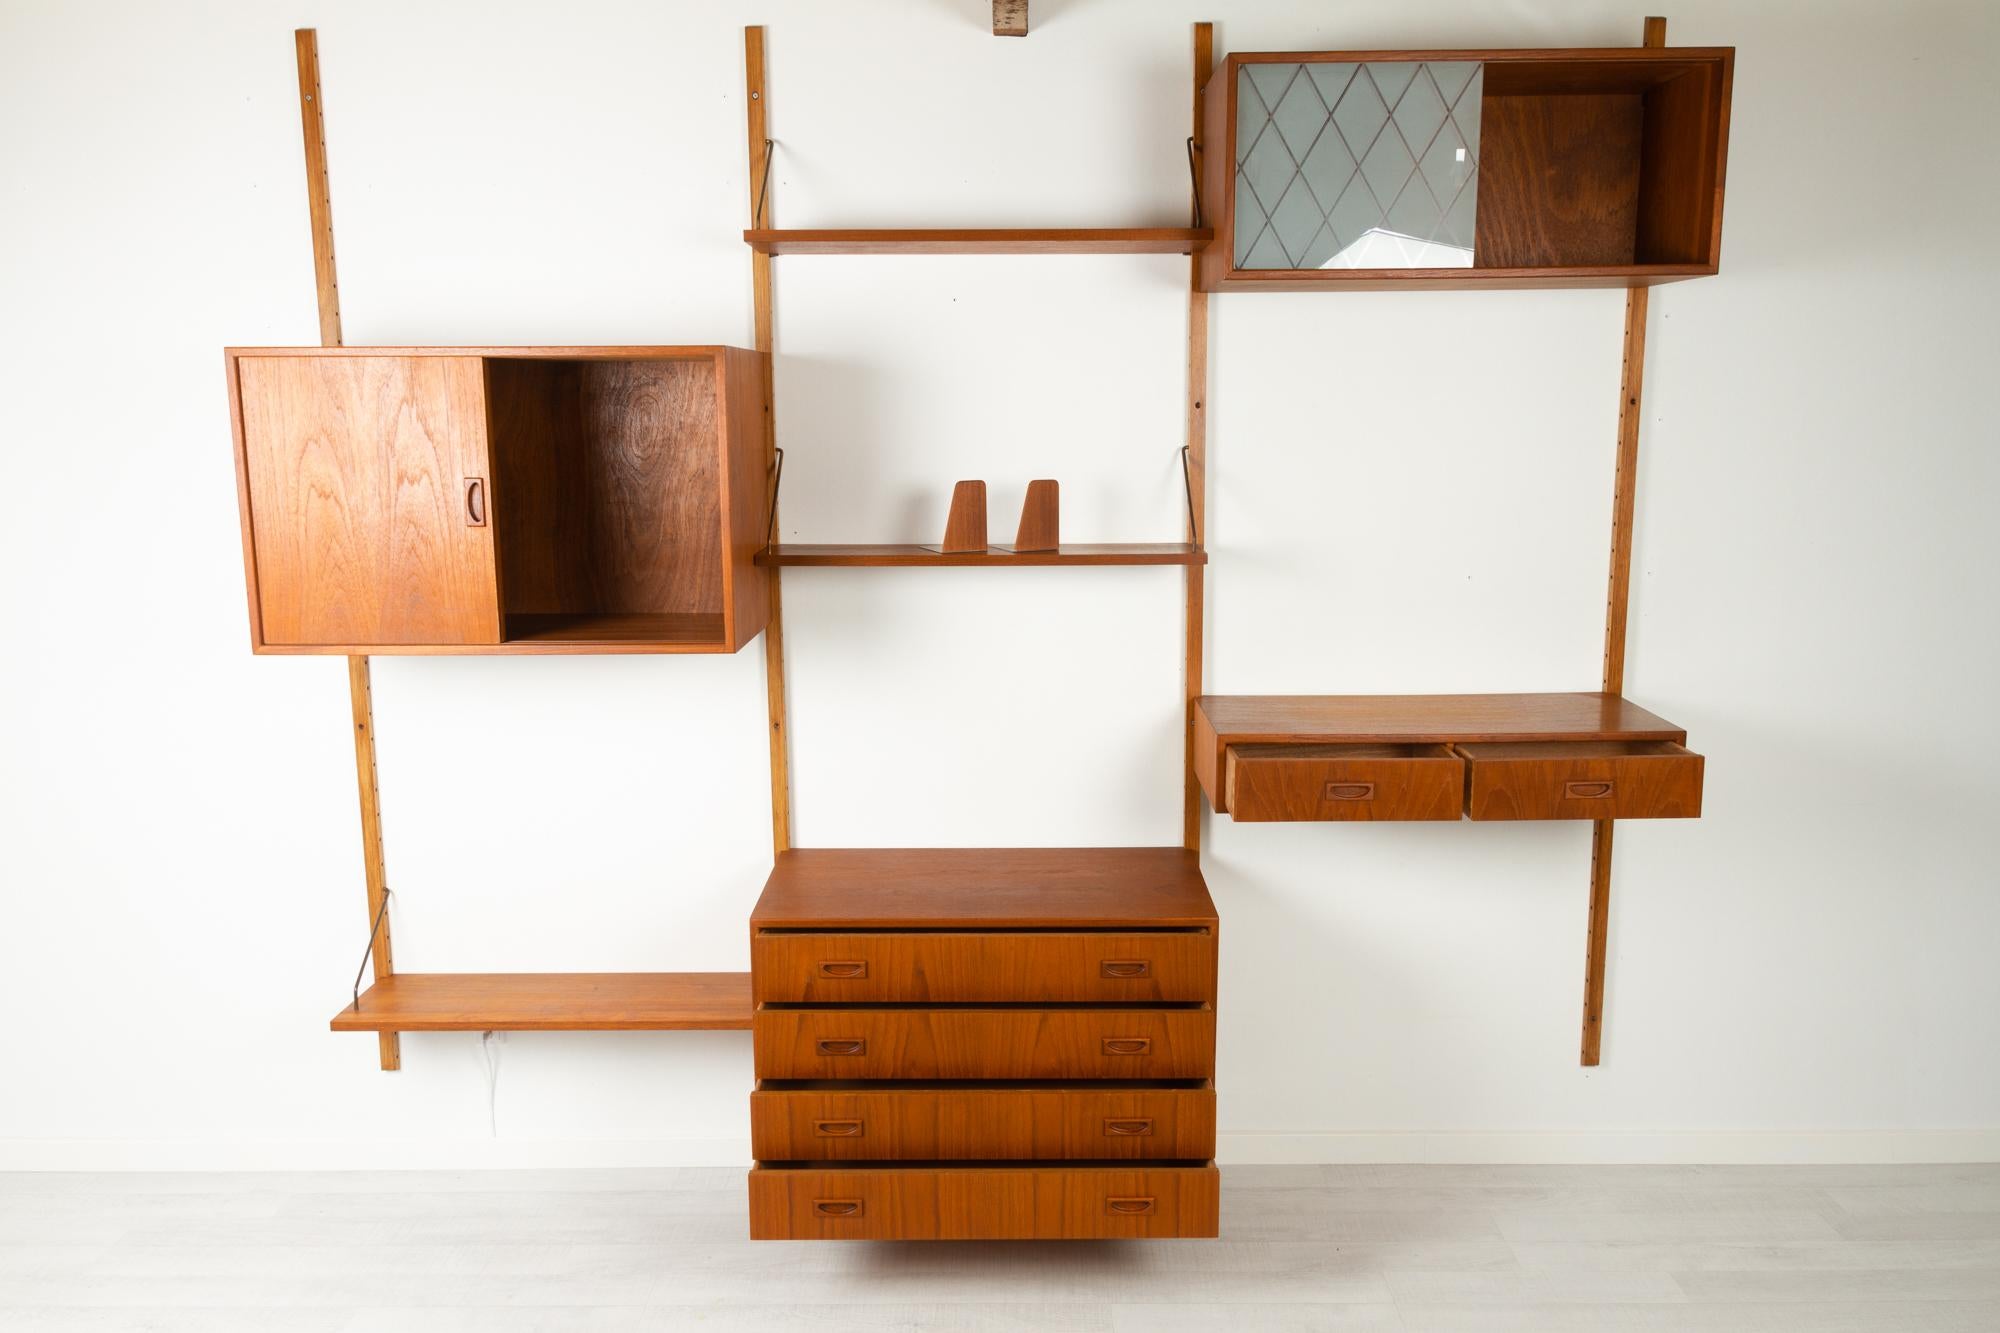 Danish teak modular wall unit by Preben Sørensen for PS System Randers, Denmark 1960s.
Danish mid-century modern three bay wall mounted shelving unit in teak. 

This set consists of the following elements:
- 4 Uprights in stained beech, length: